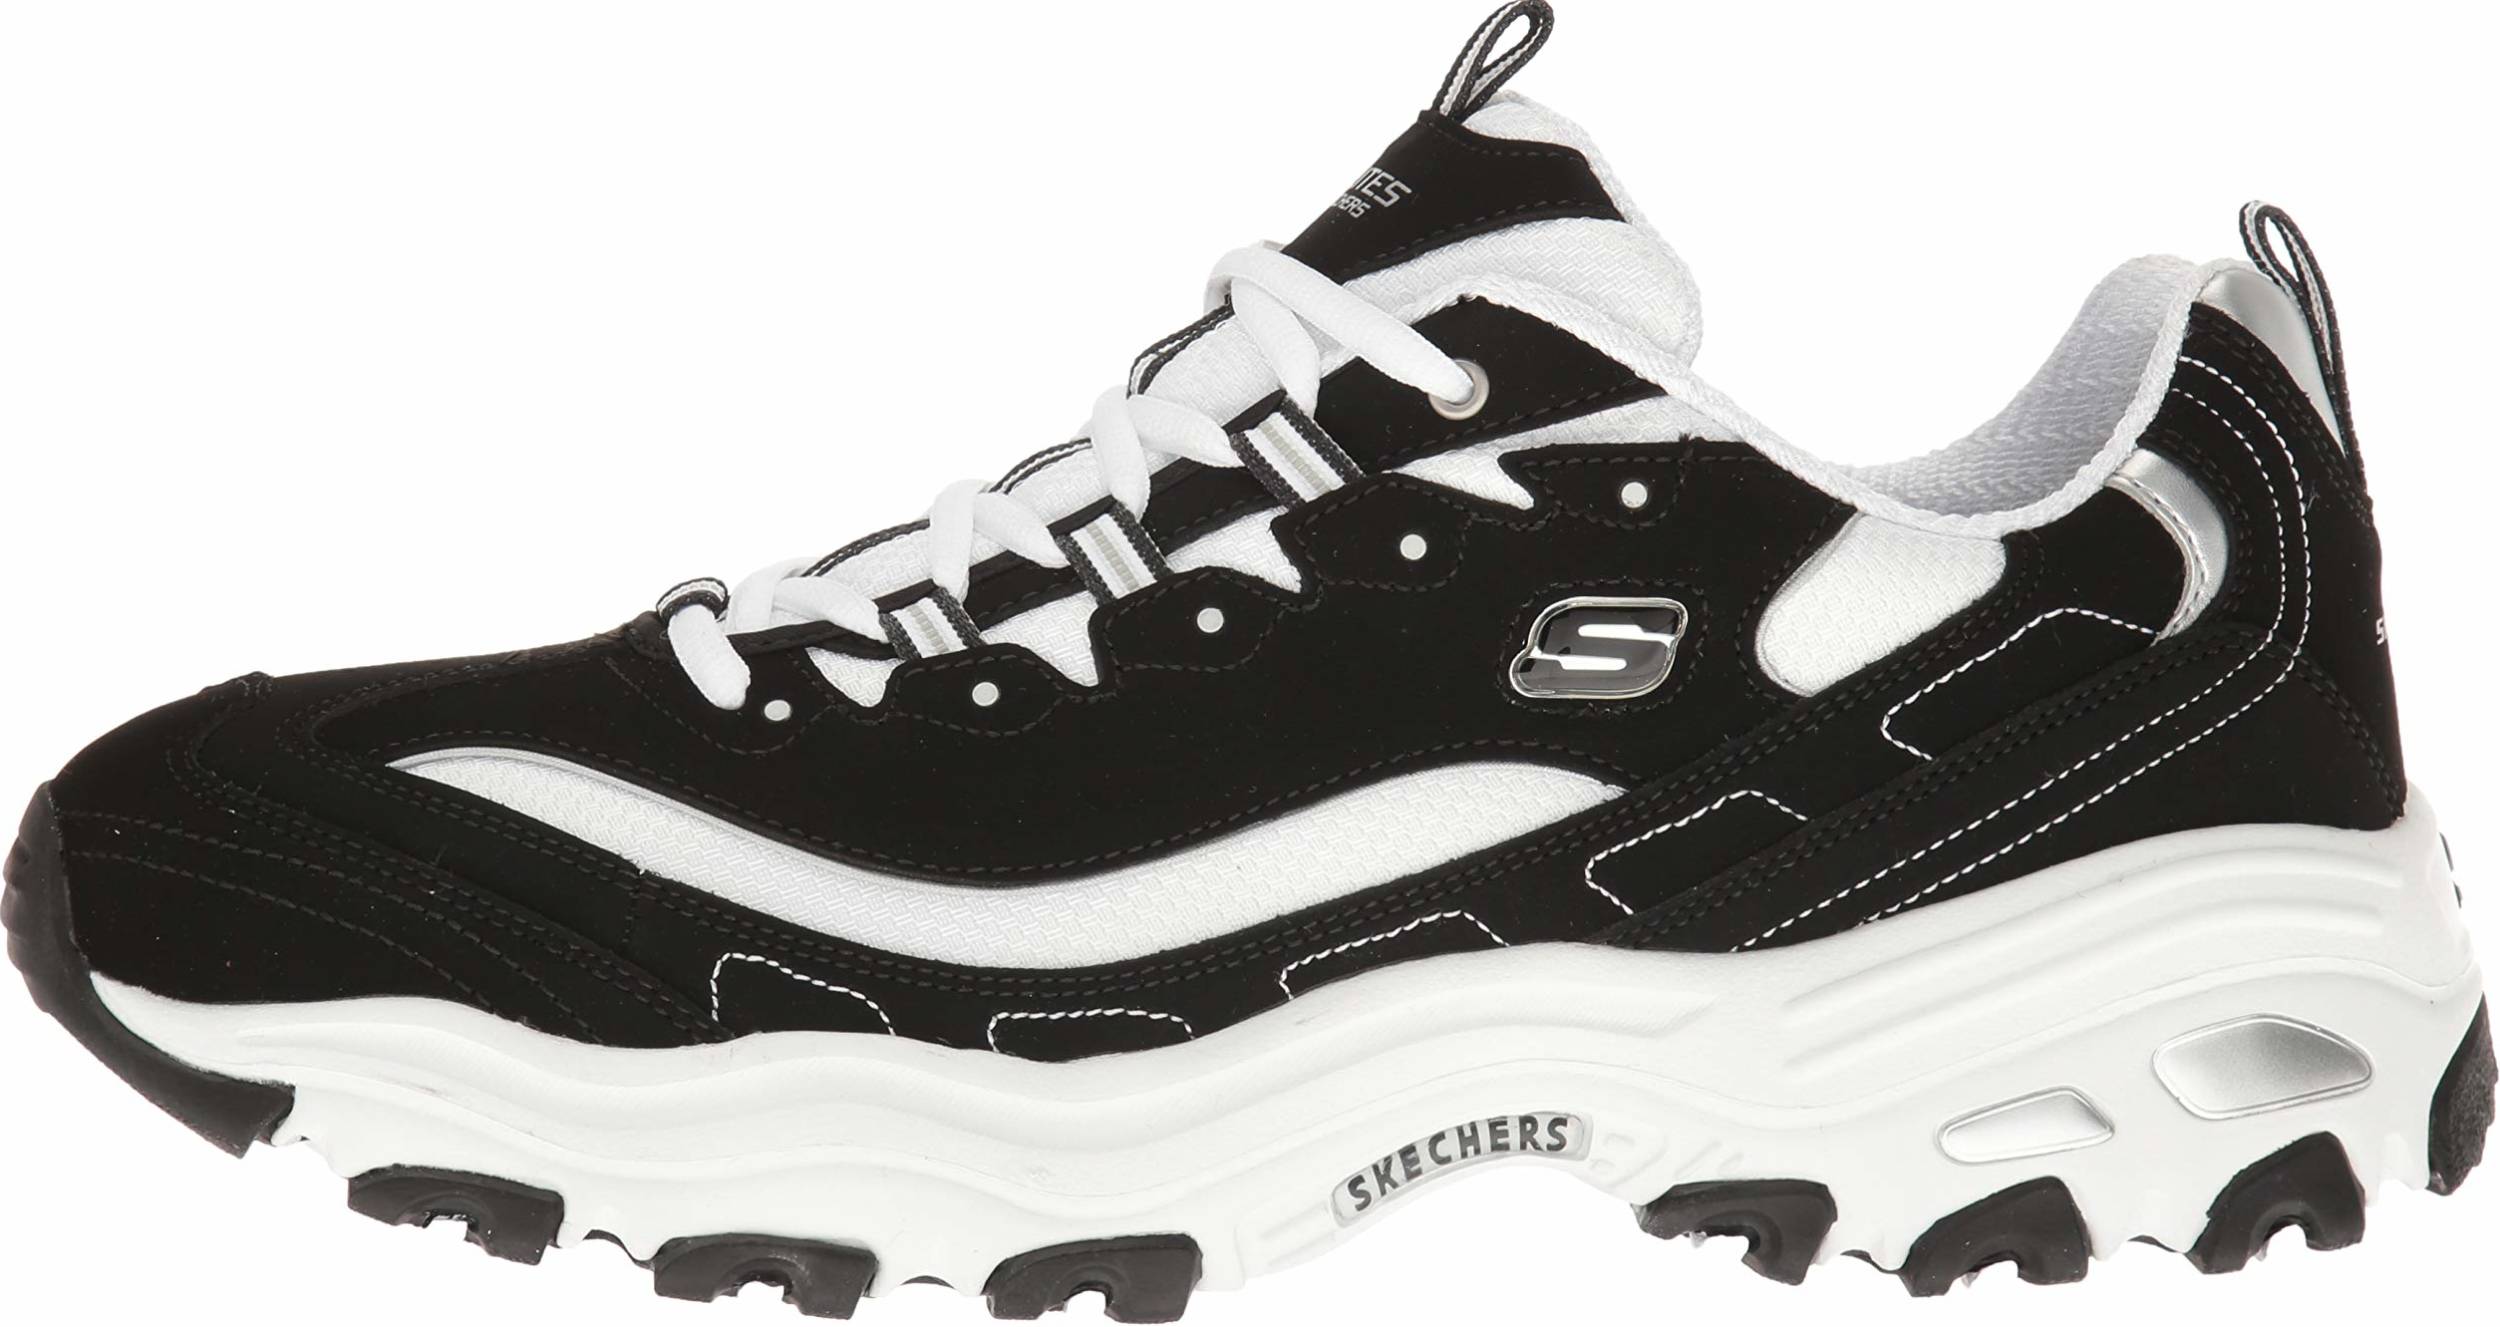 Only £43 + Review of Skechers D'Lites 